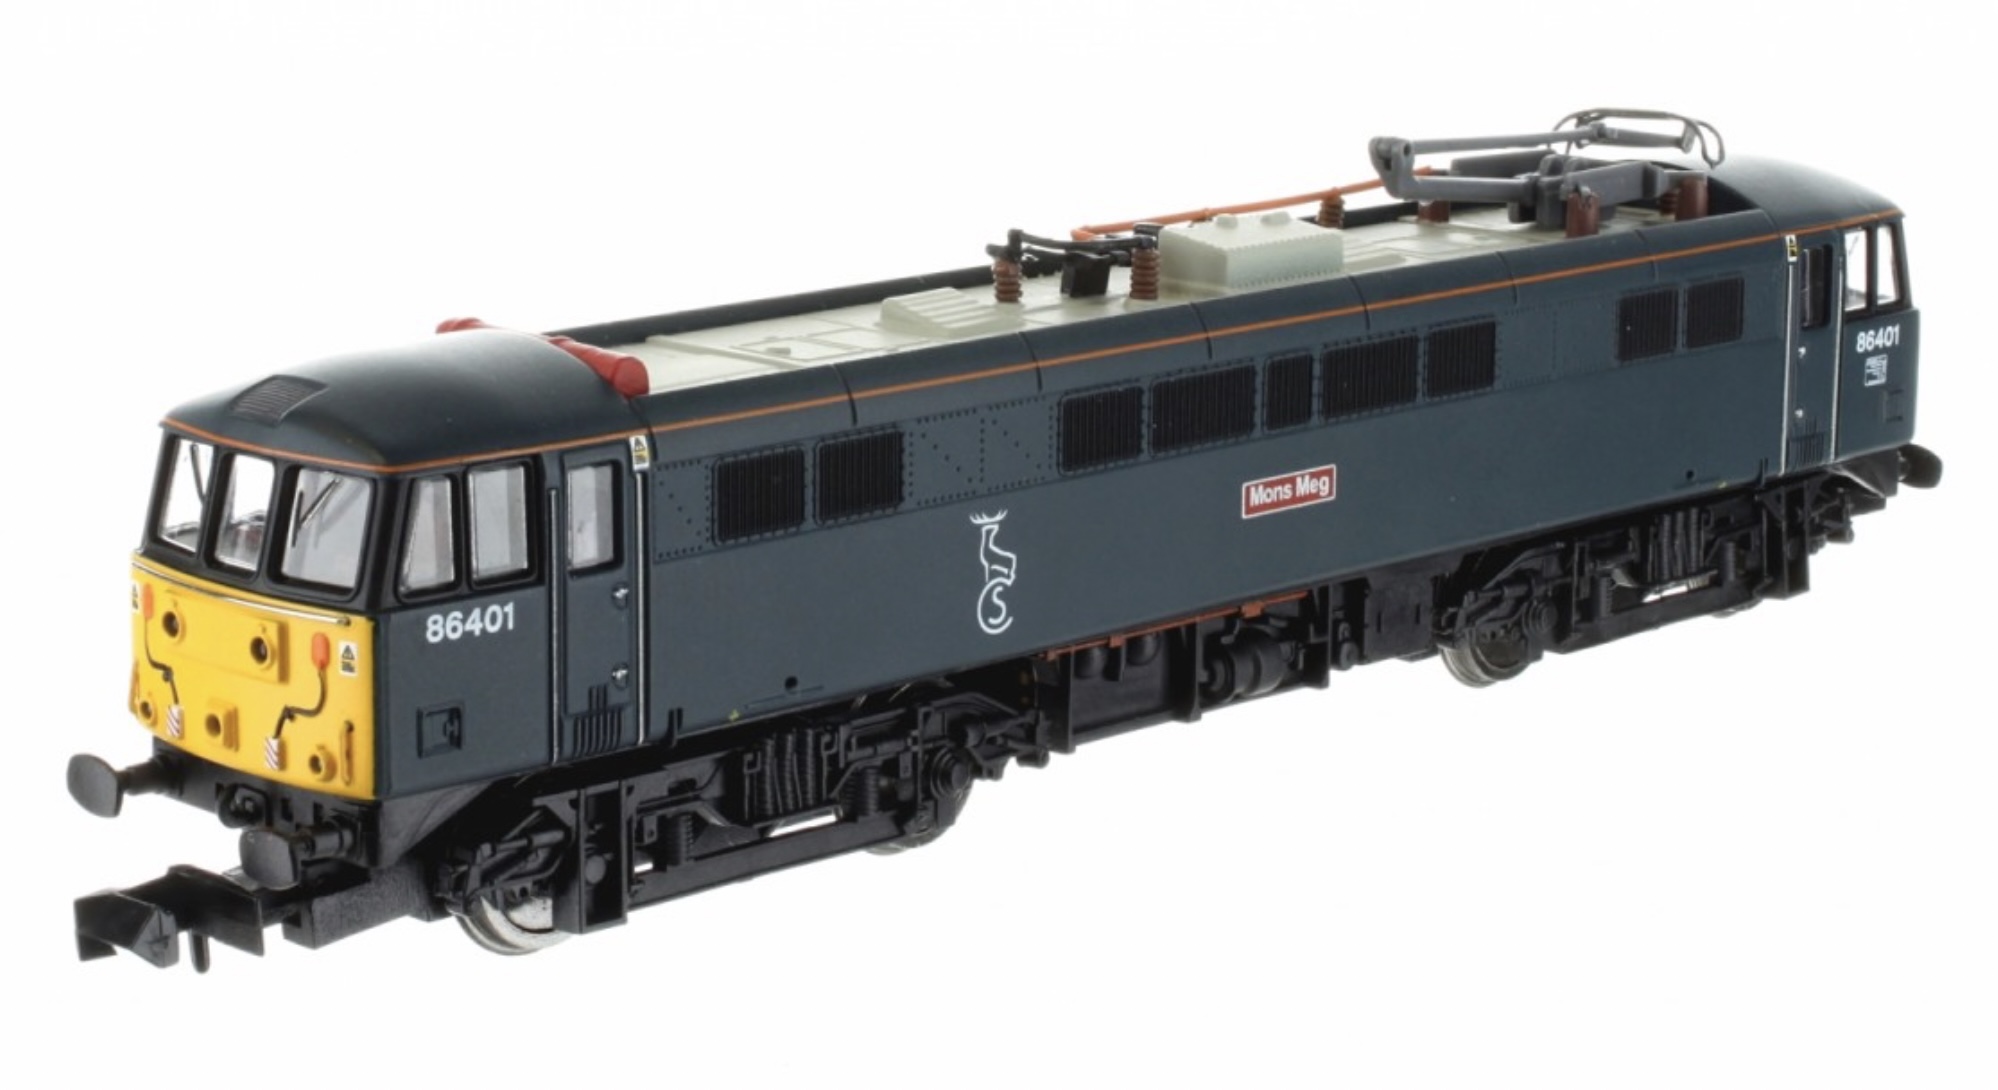 N Scale - Dapol - 2D-026-001 - Locomotive, Electric, Class 86 - Painted/Lettered - 86401